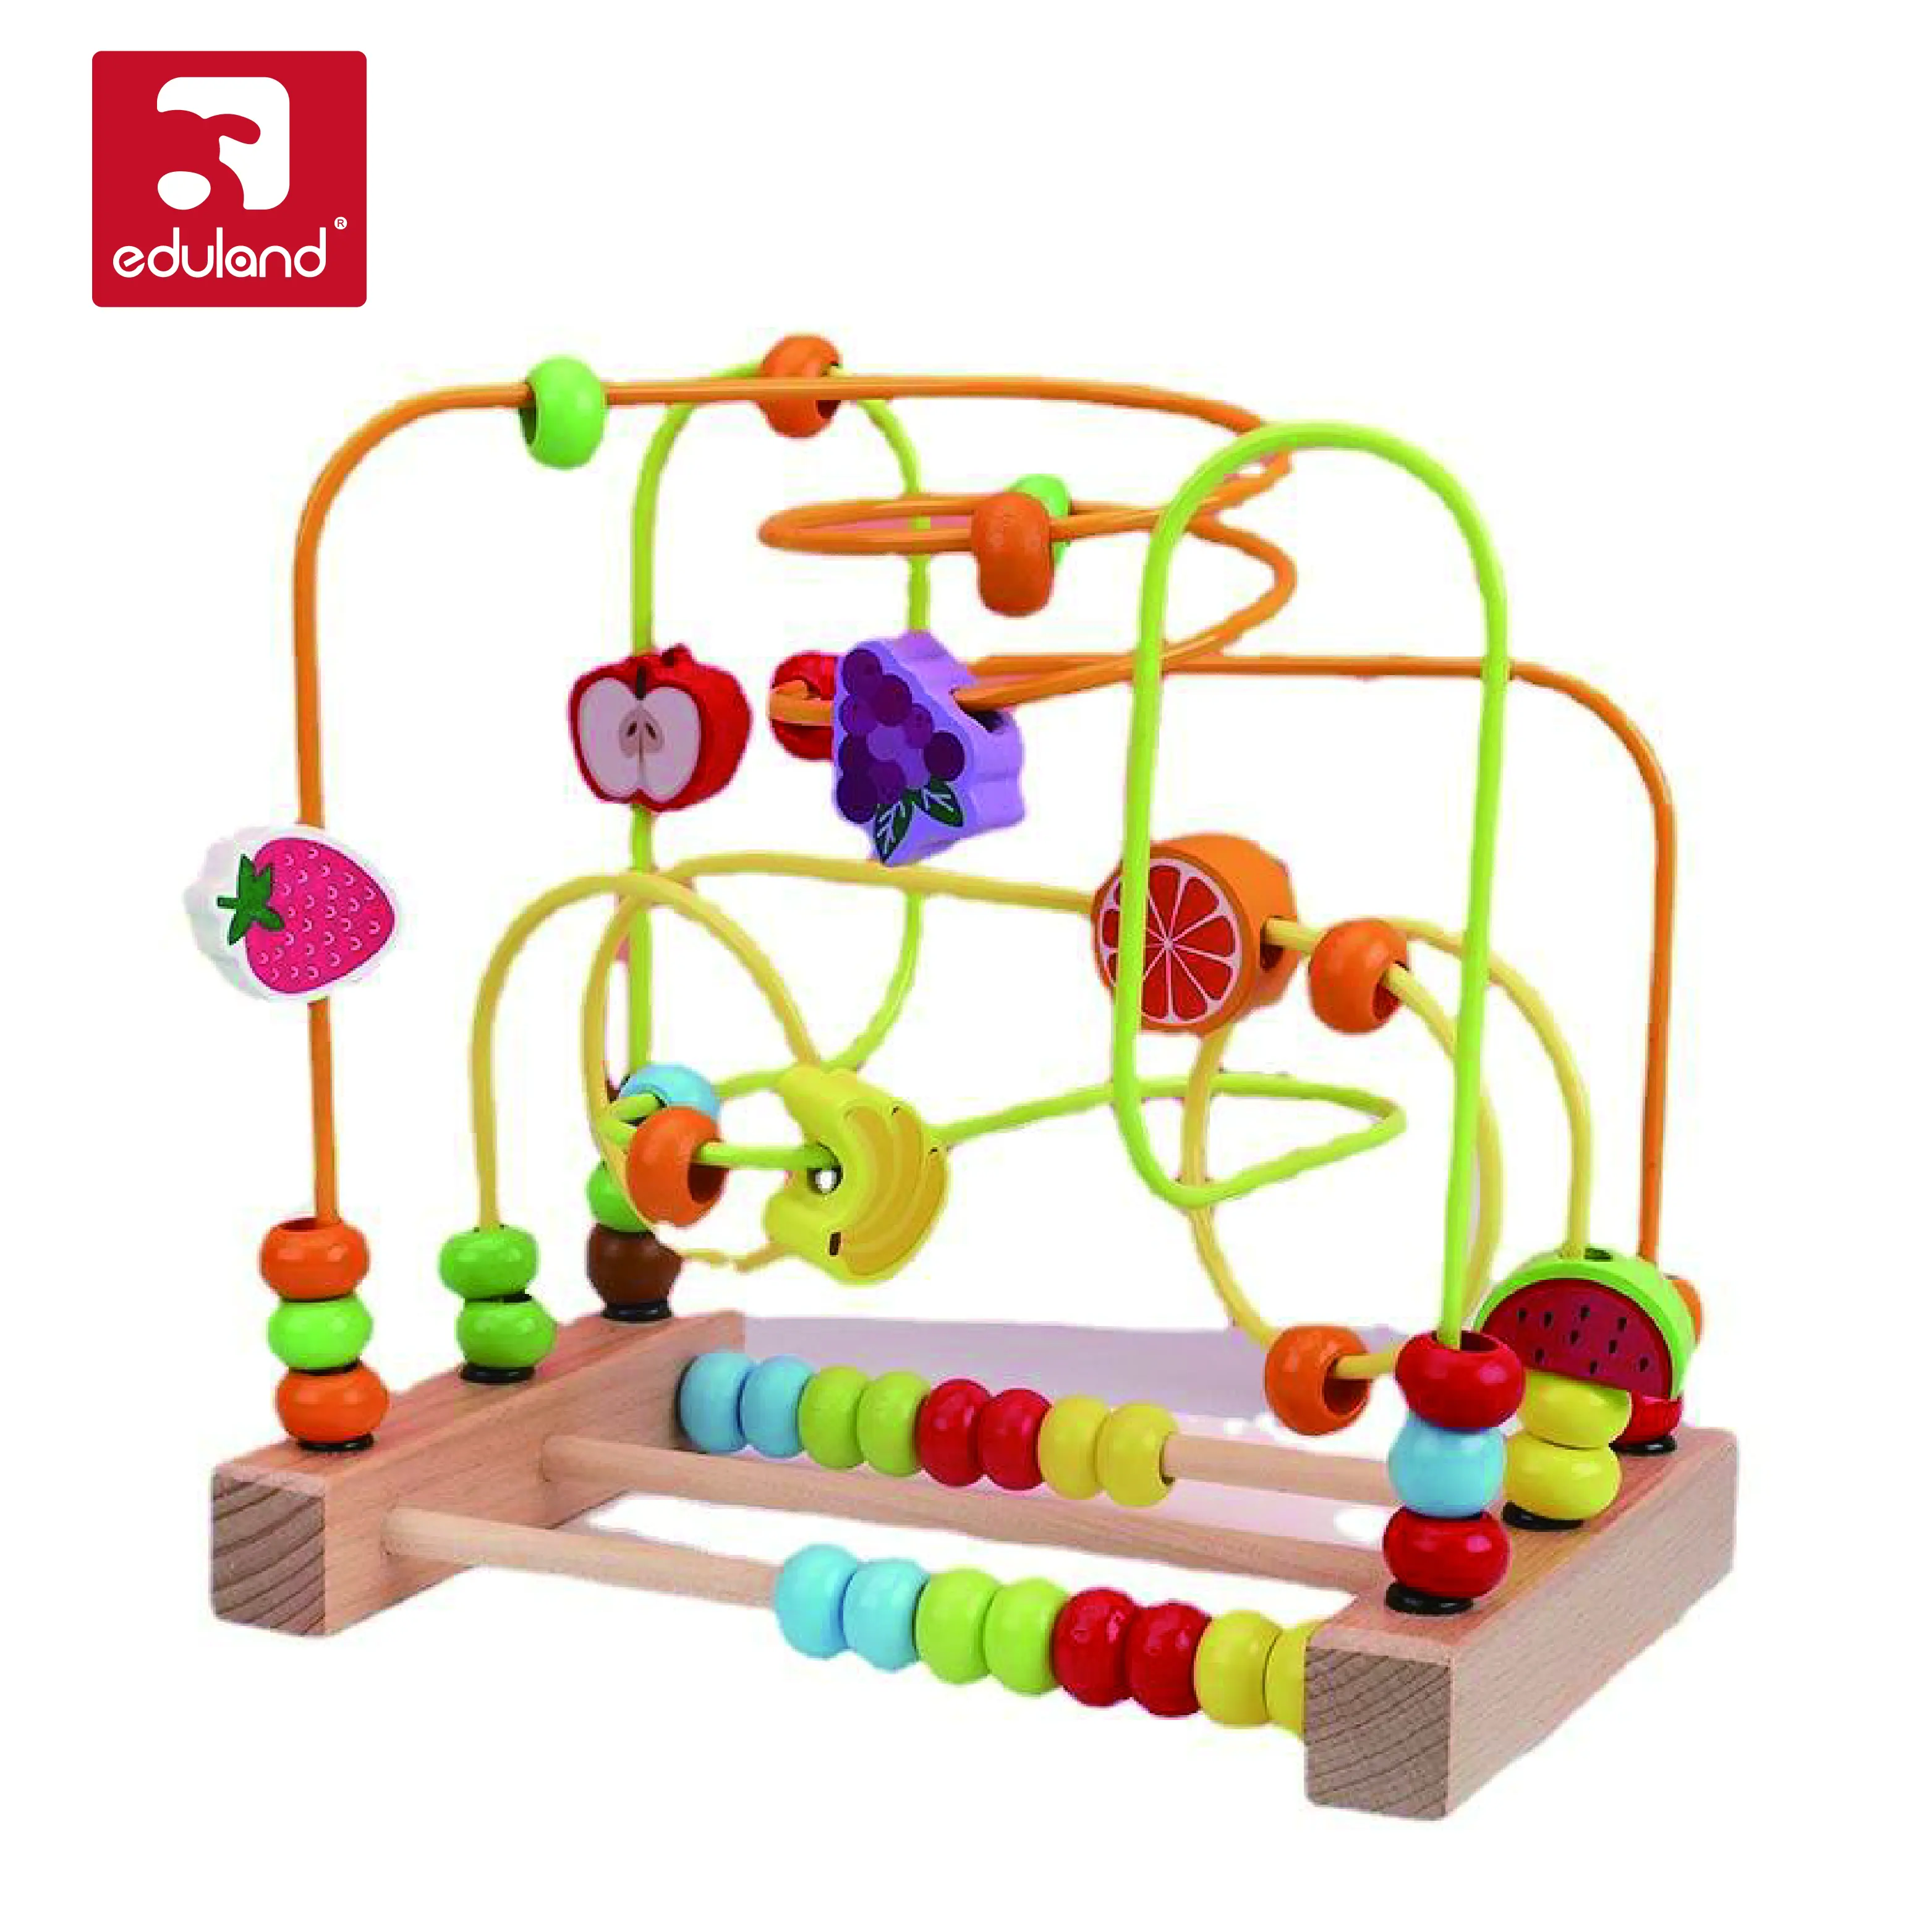 Toddler Baby Educational Wooden Toys Wooden Maze Roller Coaster Beaded Wooden Educational Toys